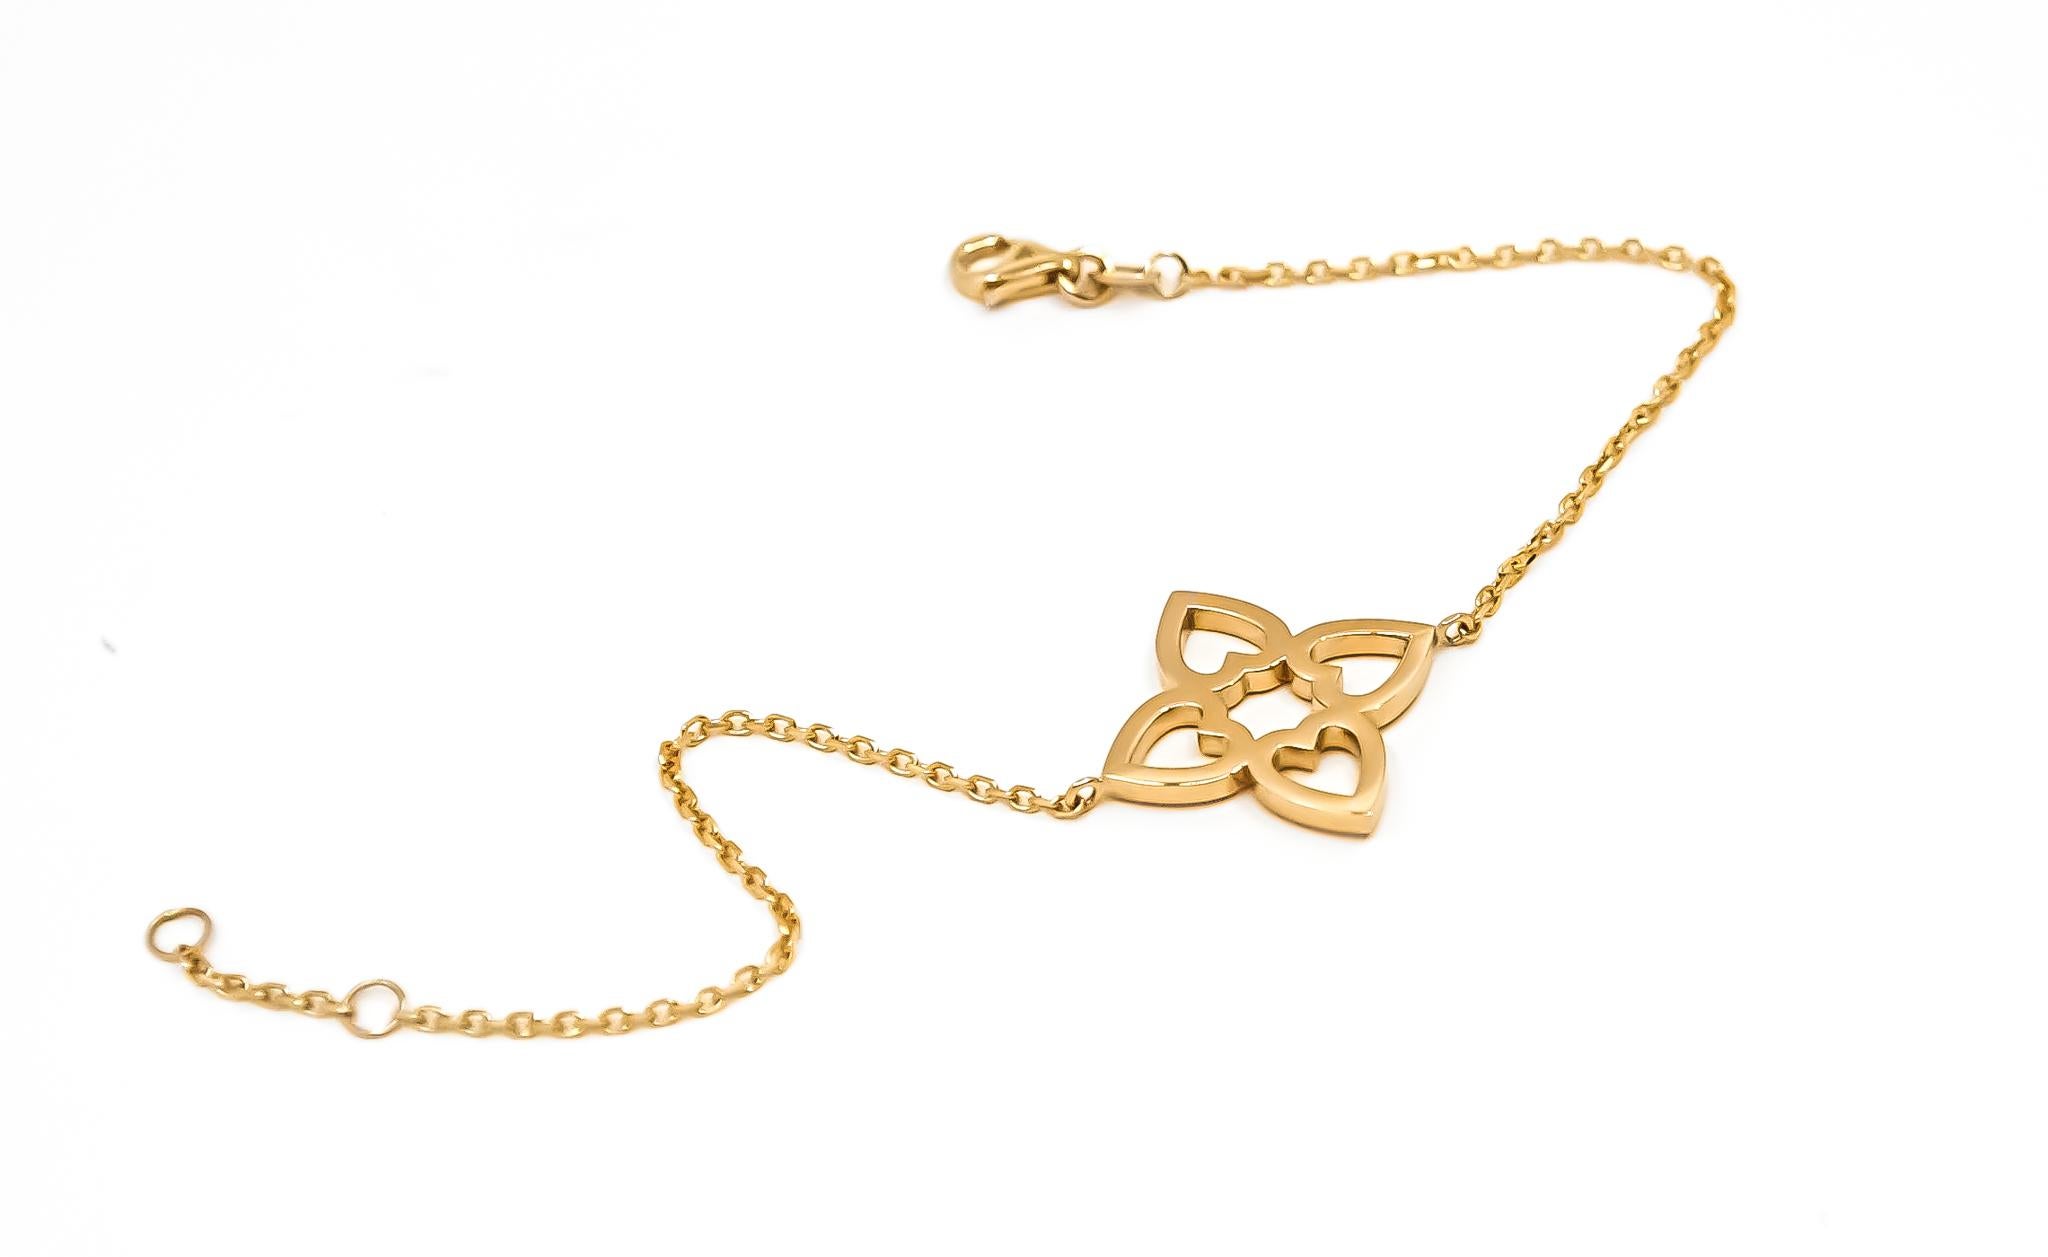 Romantic Connected Hearts Bracelet in 18kt Gold For Sale